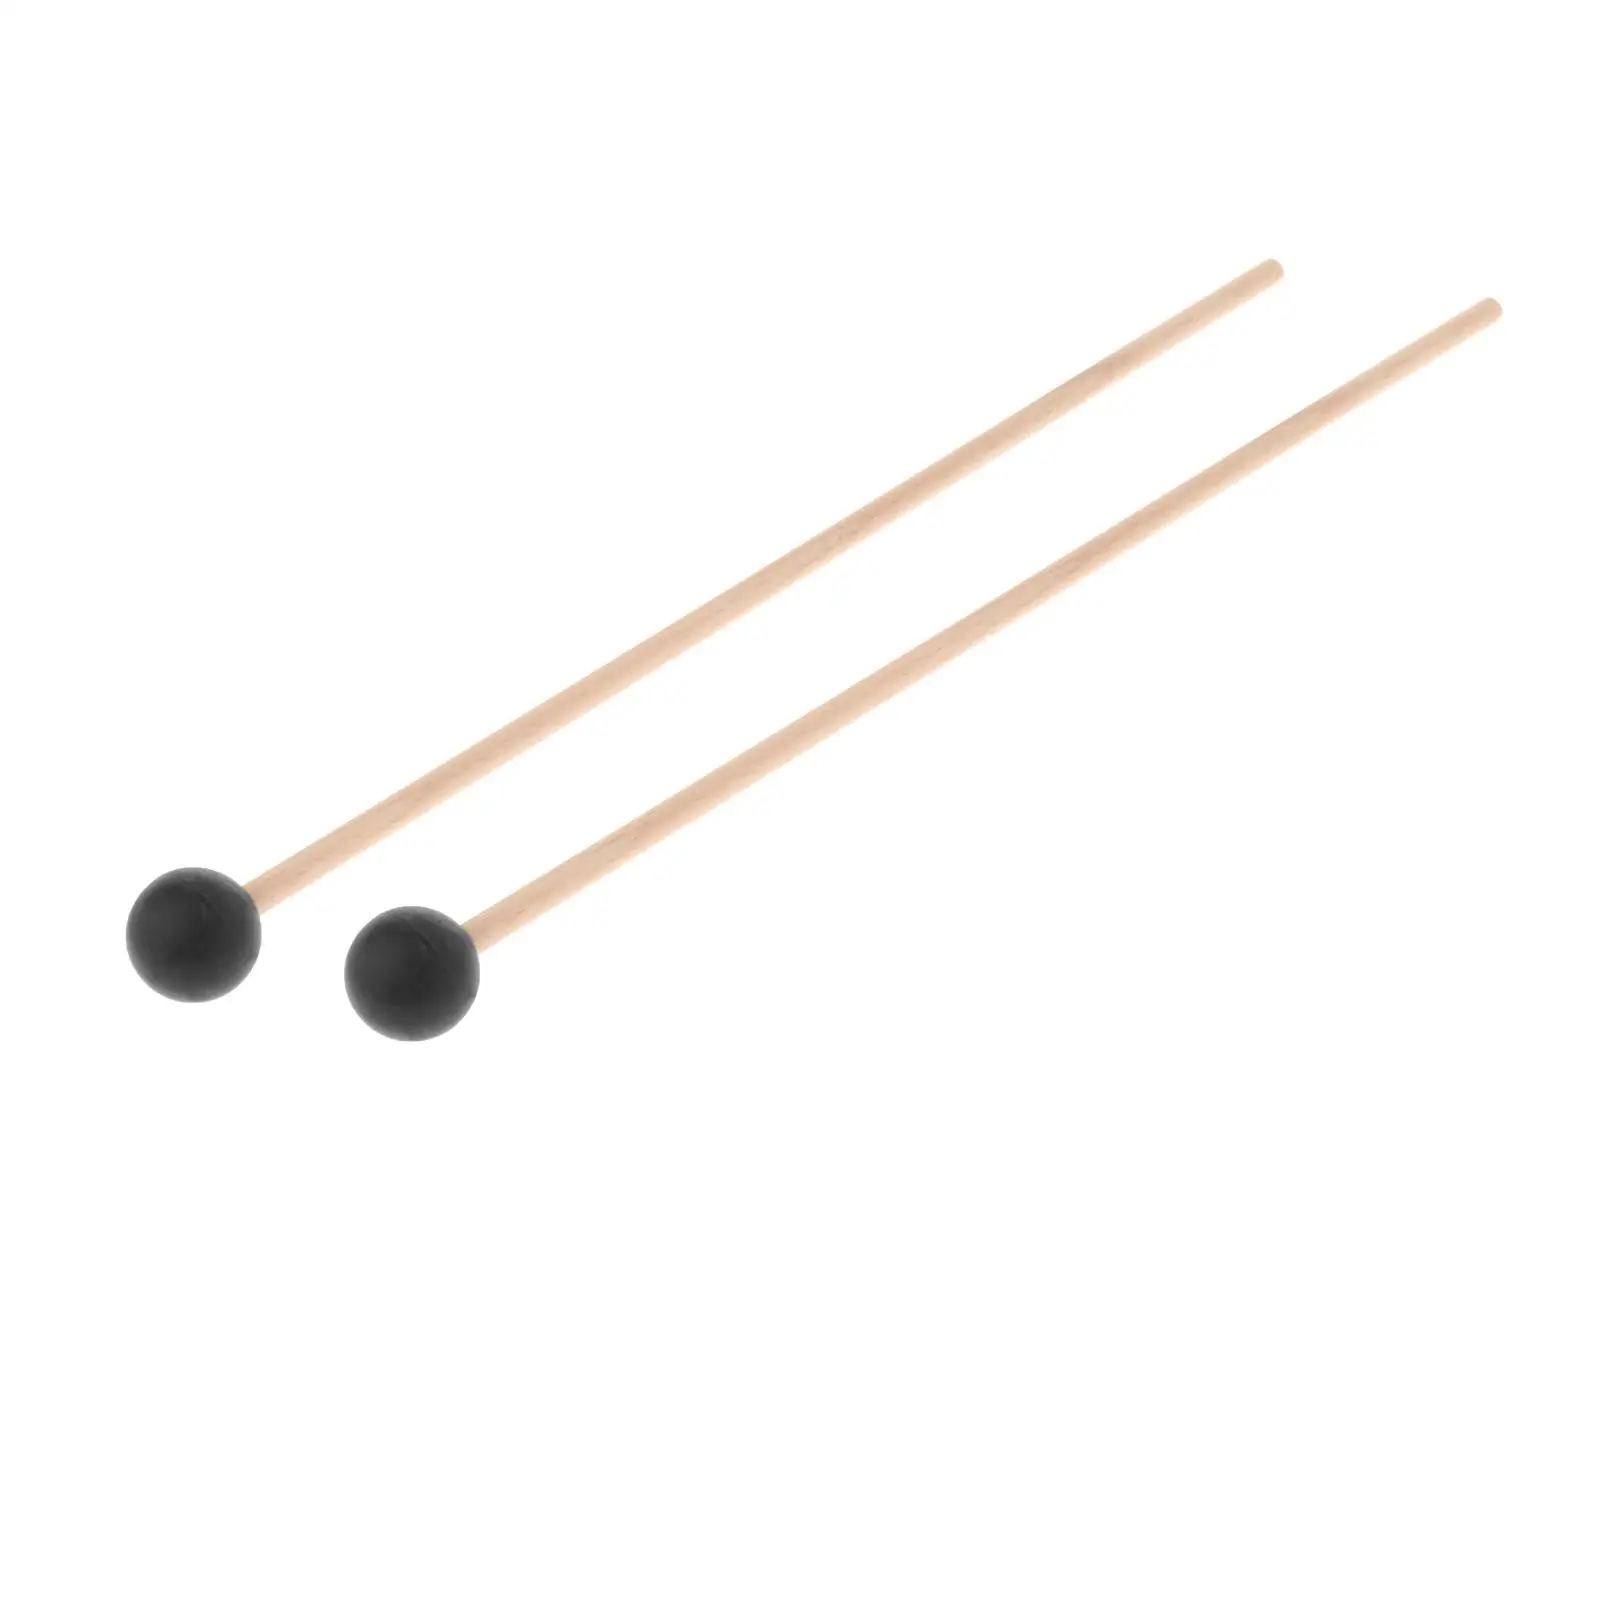 2Pcs Marimba Mallets with Wooden Handle Beater Percussion Xylophone Bell Mallets for Child Drummers Practitioners Ethereal Drums